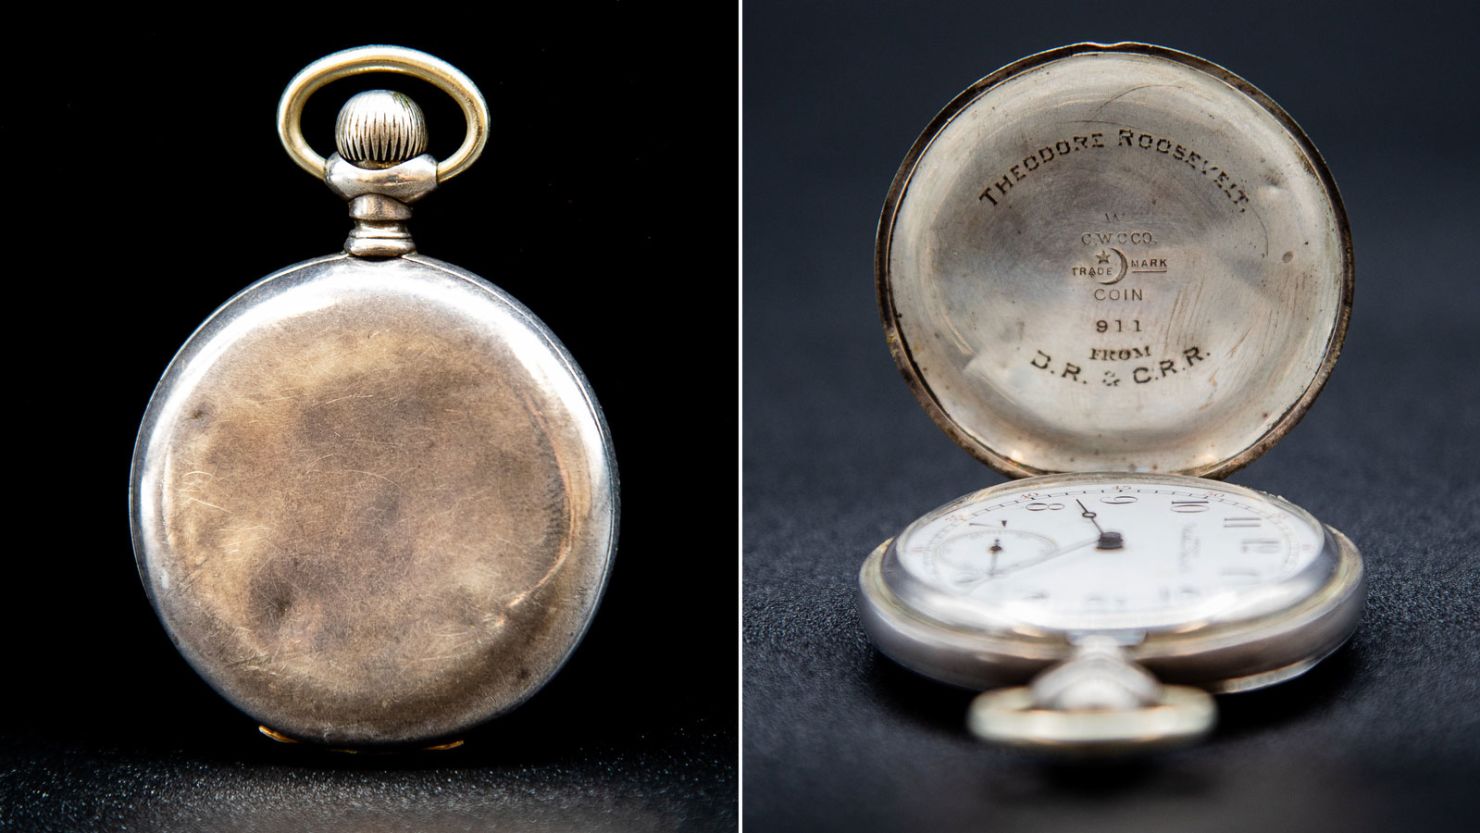 A watch that was gifted to Theodore Roosevelt in the late 1800s and later stolen was returned its home in New York.